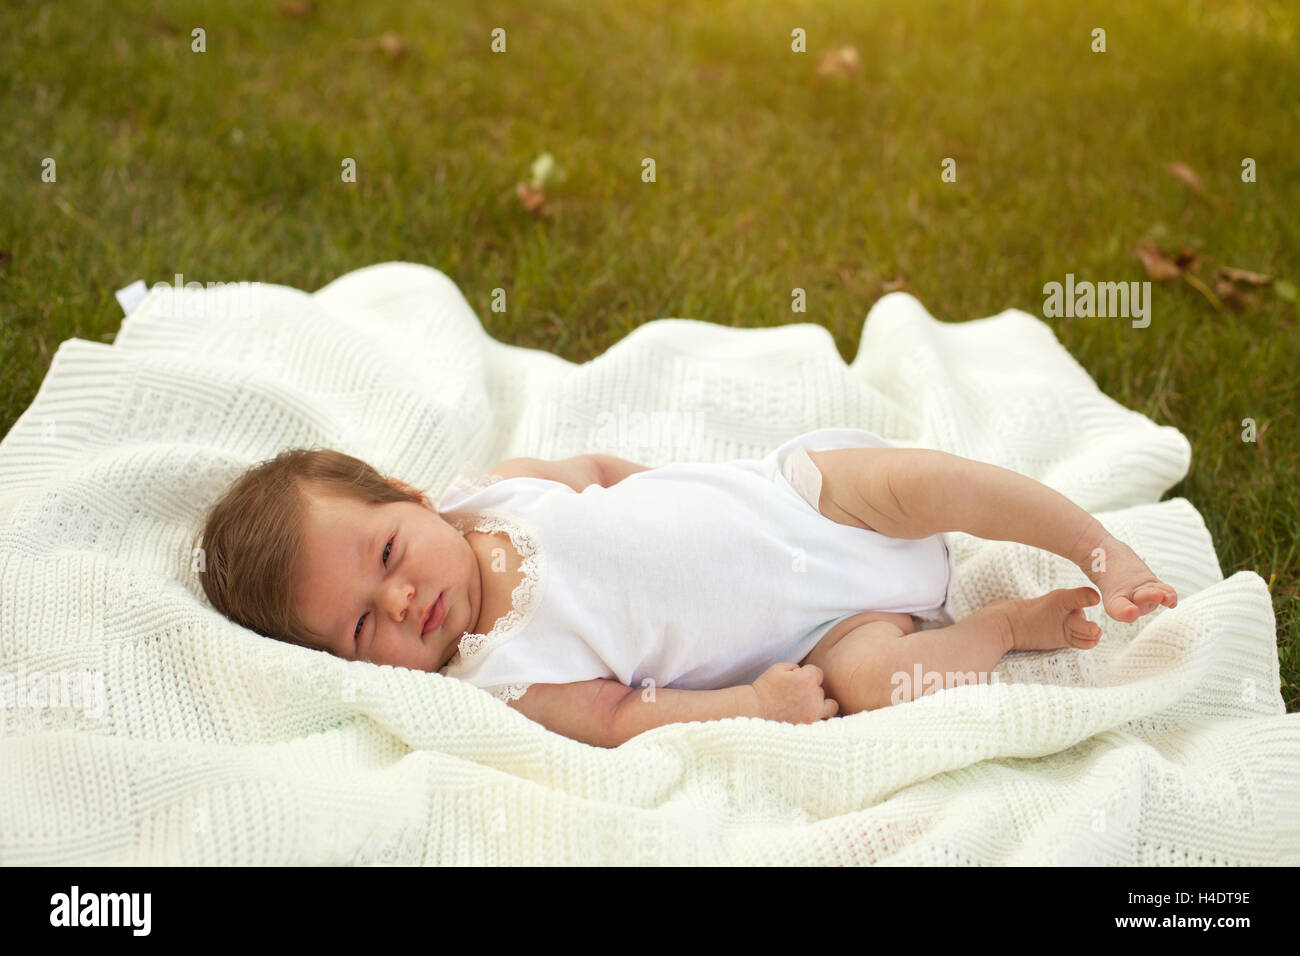 Baby lying on the blanket on the grass Stock Photo